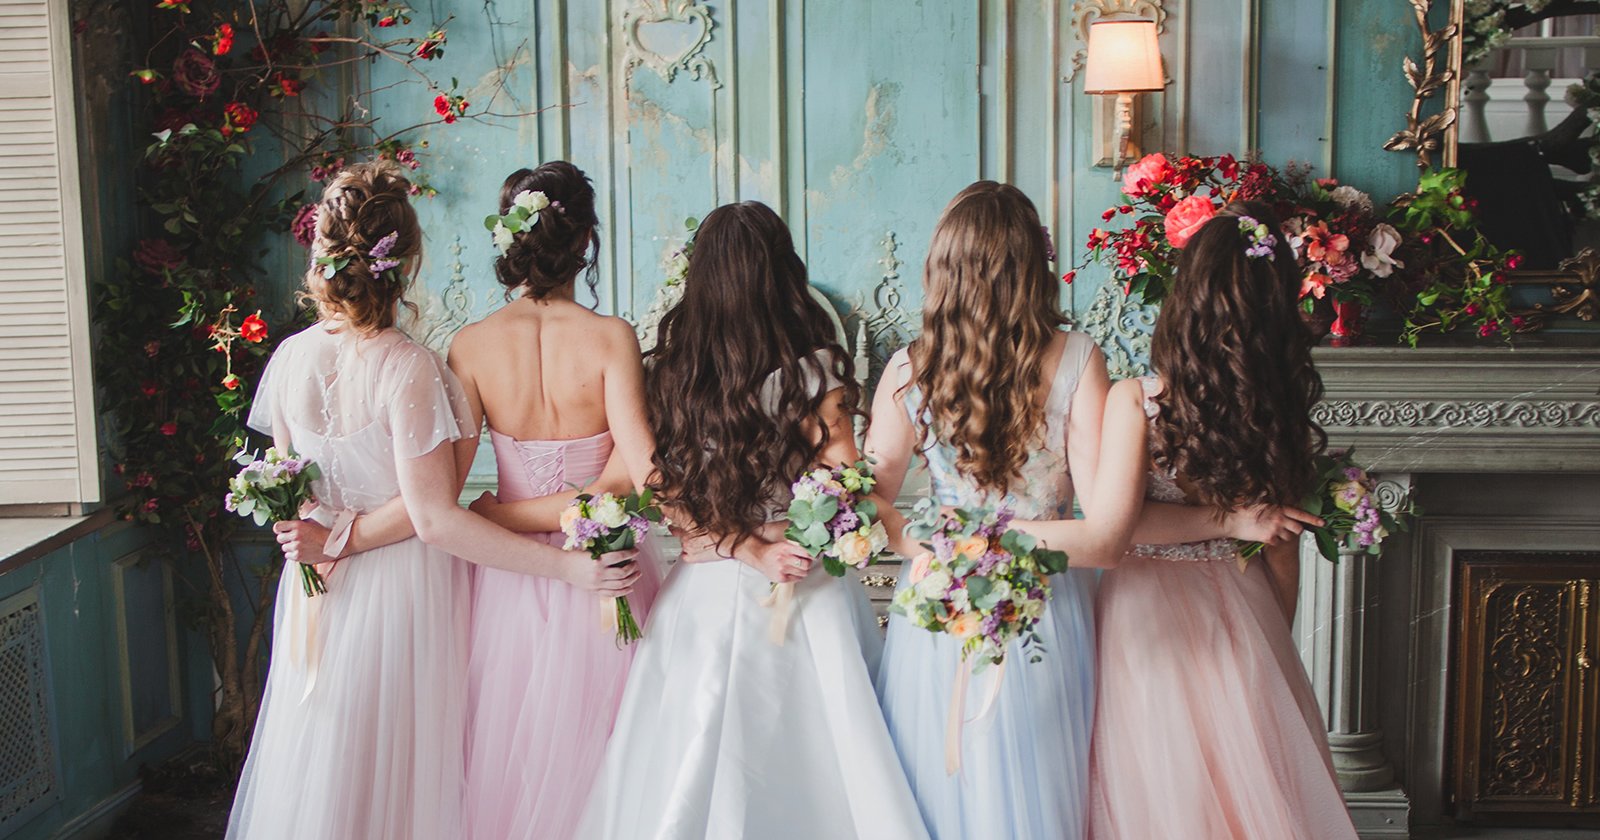 Wedding Guest  Guide to Being Wedding Occasion Ready 